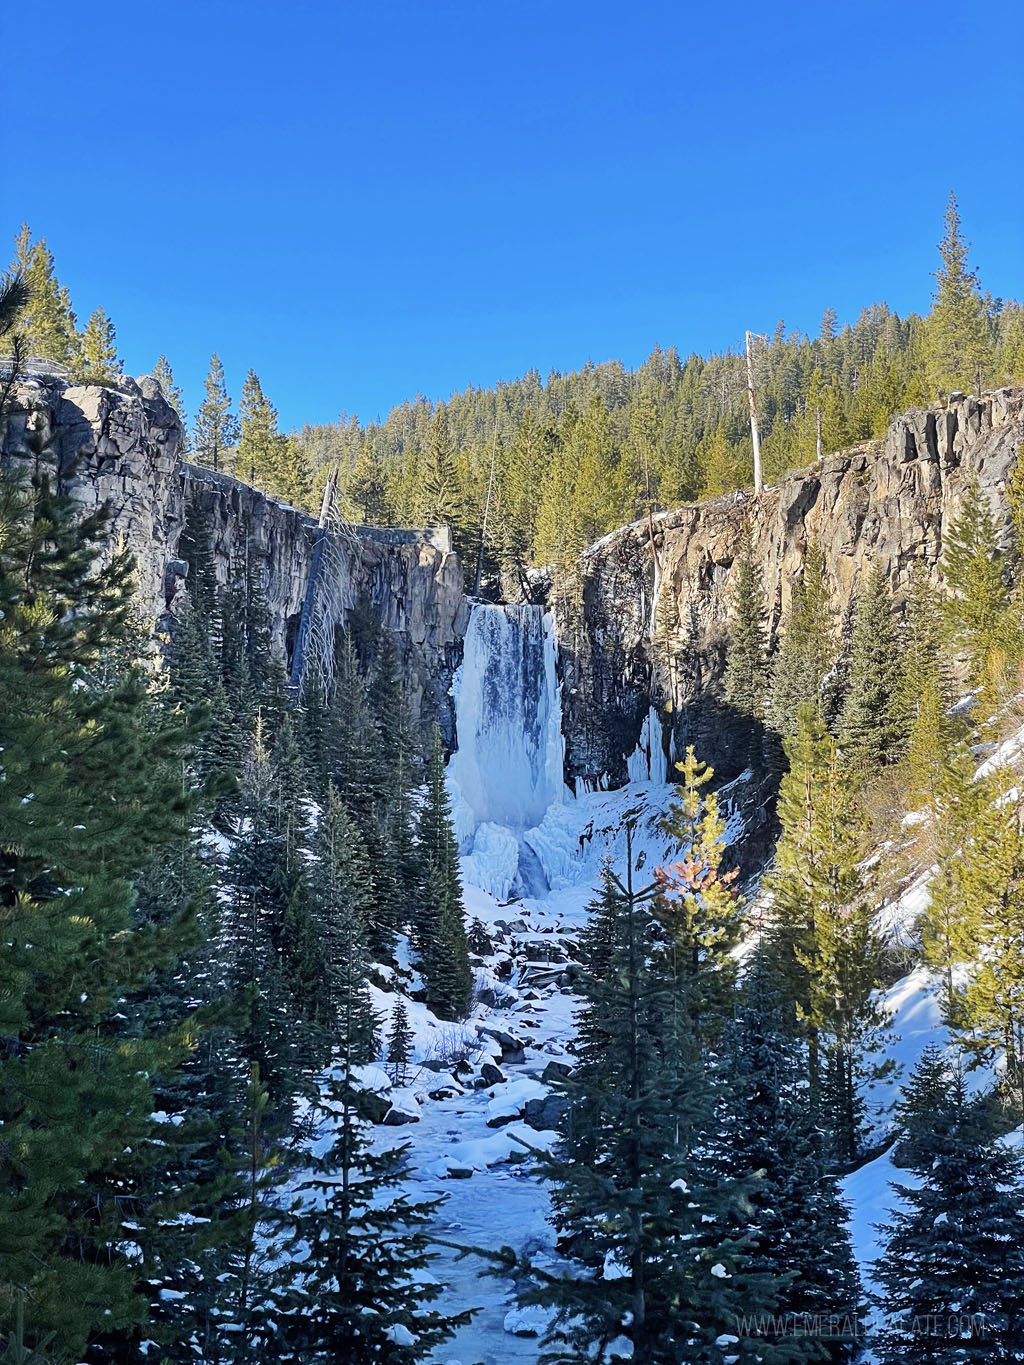 Tumalo Falls in winter, one of the best things to do in Bend, Oregon in winter